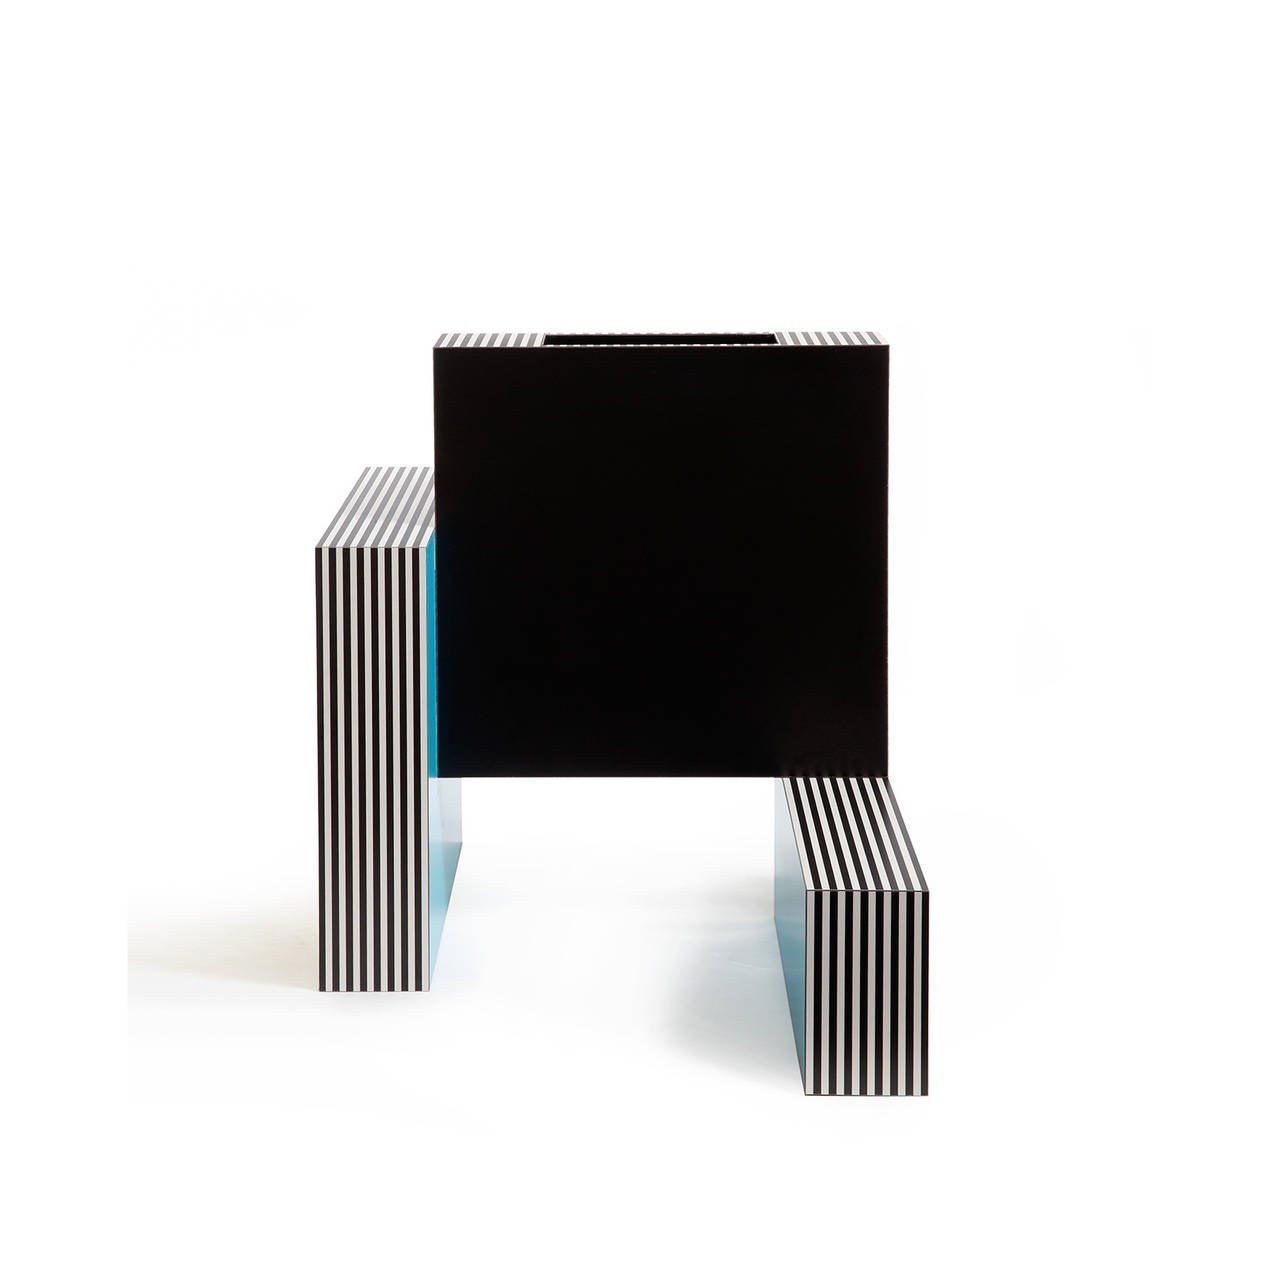 American Memphis Inspired Vessel from the Neo Laminati Collection For Sale